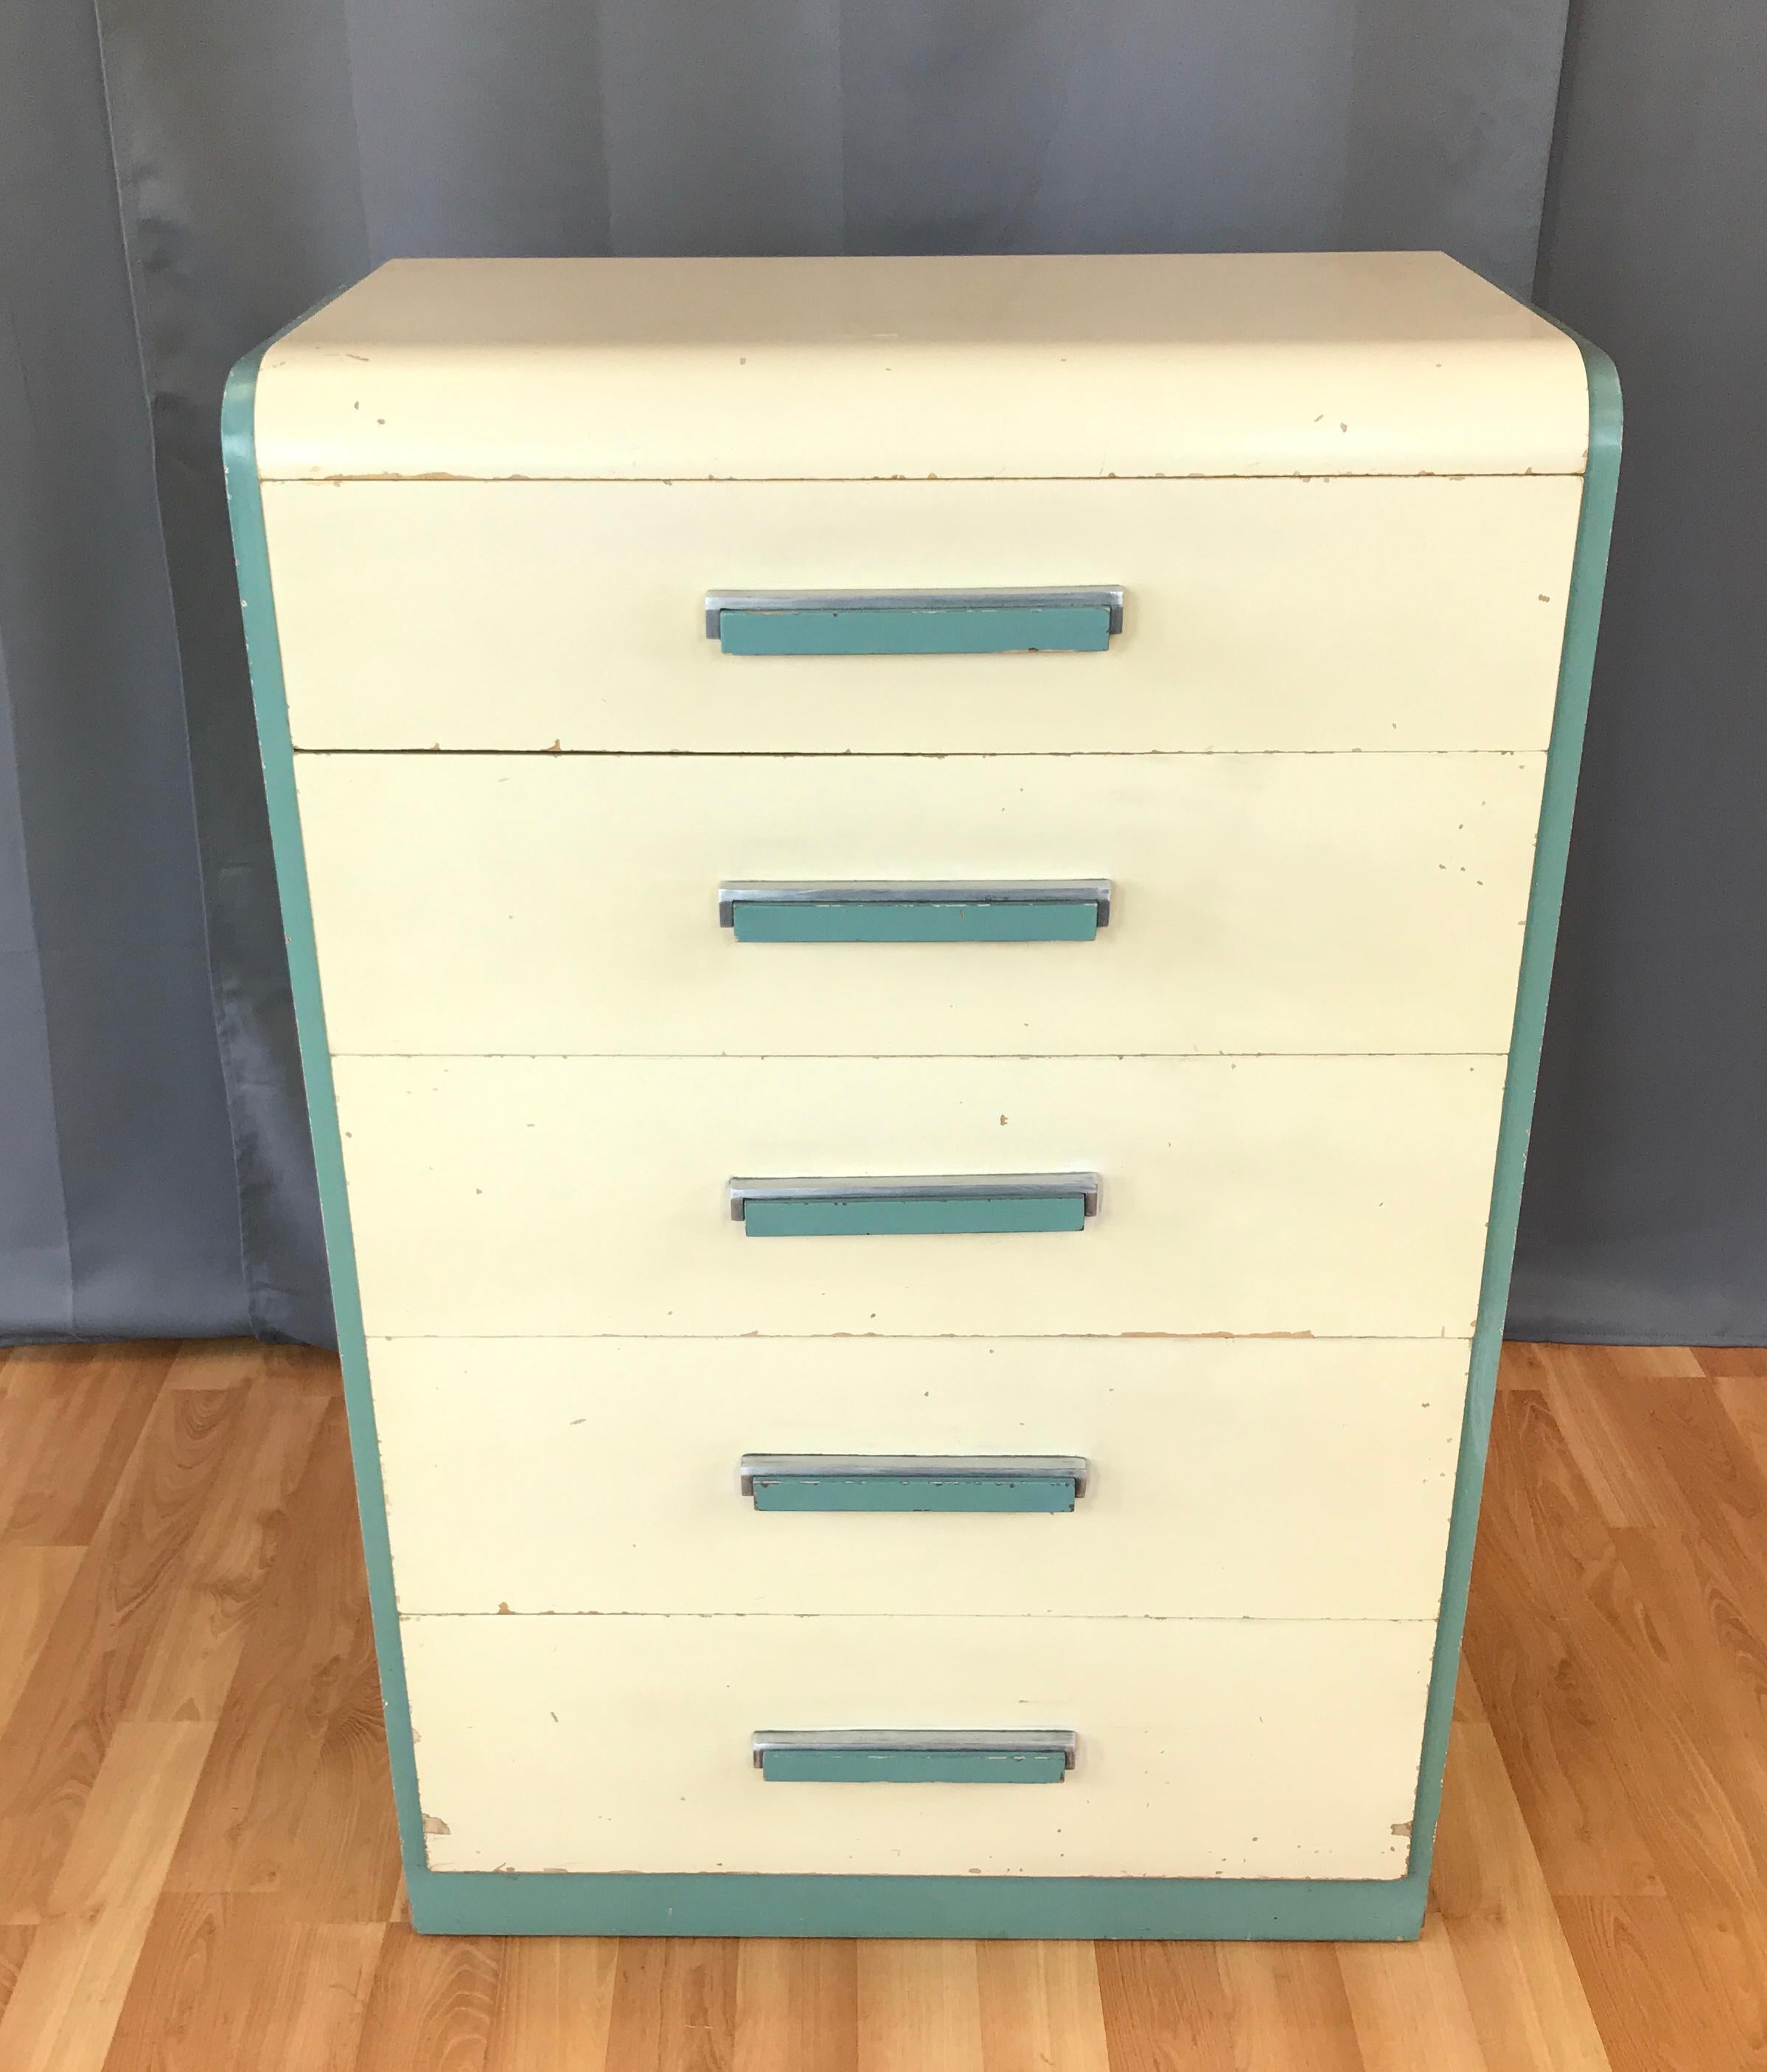 Offered here is a circa 1930s high boy dresser designed by Donald Deskey for Widdicomb Furniture Company of Grand Rapids.

In its original paint color. This example evokes streamliner feel of the high Art Deco style with nautical celadon green and